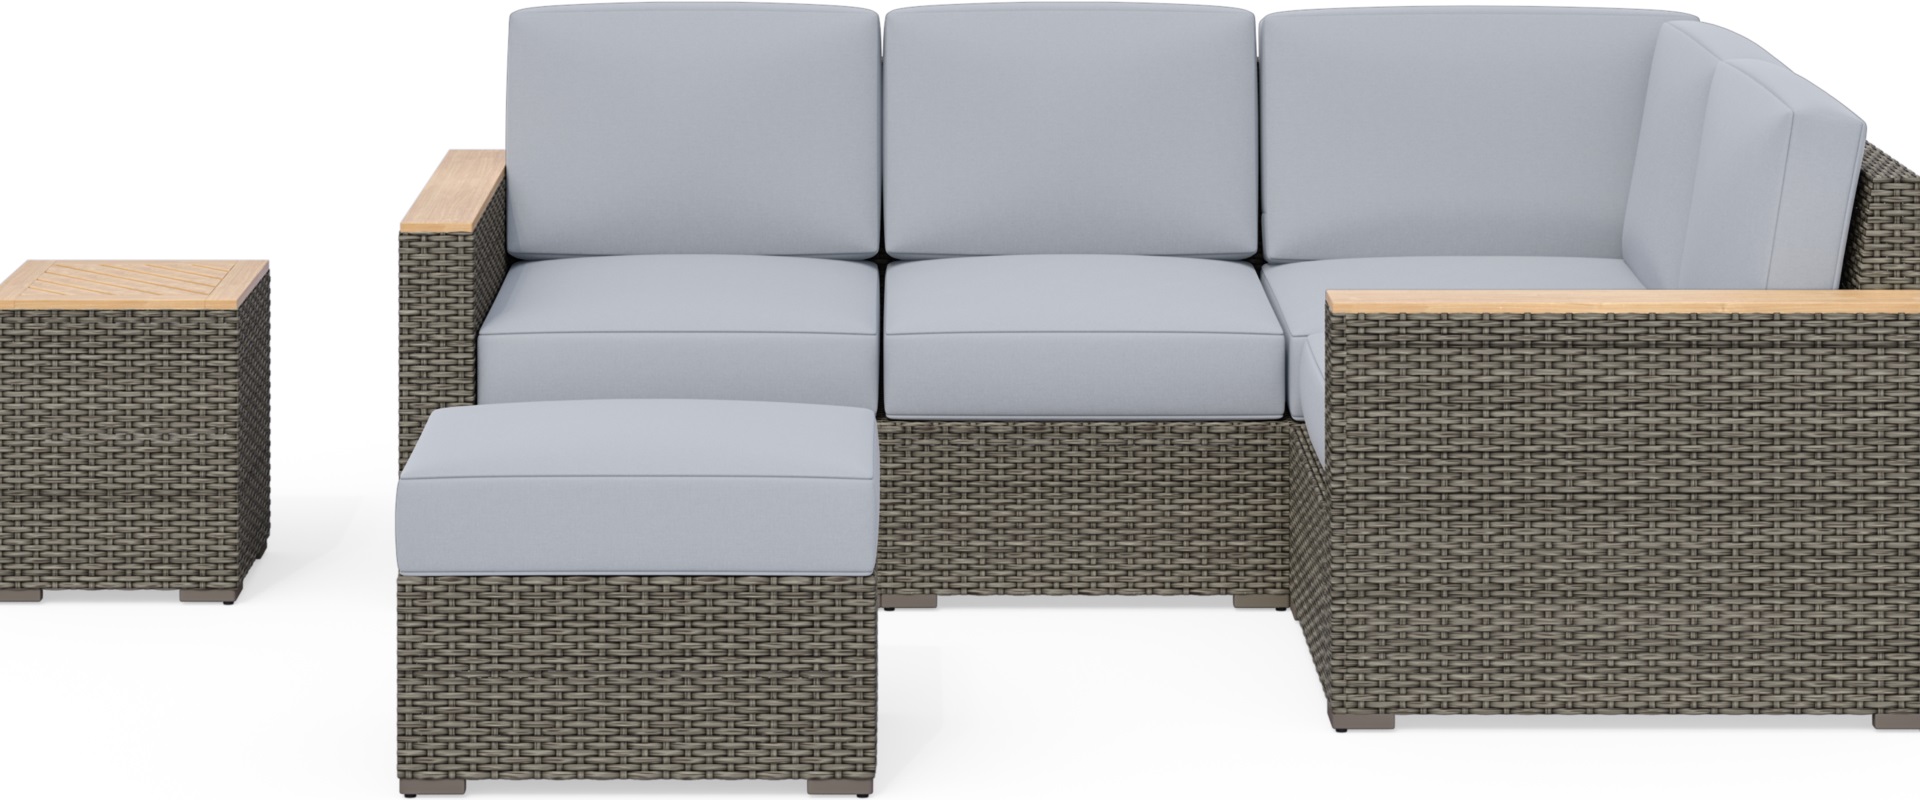 Outdoor 4 Seat Sectional, Ottoman and Side Table